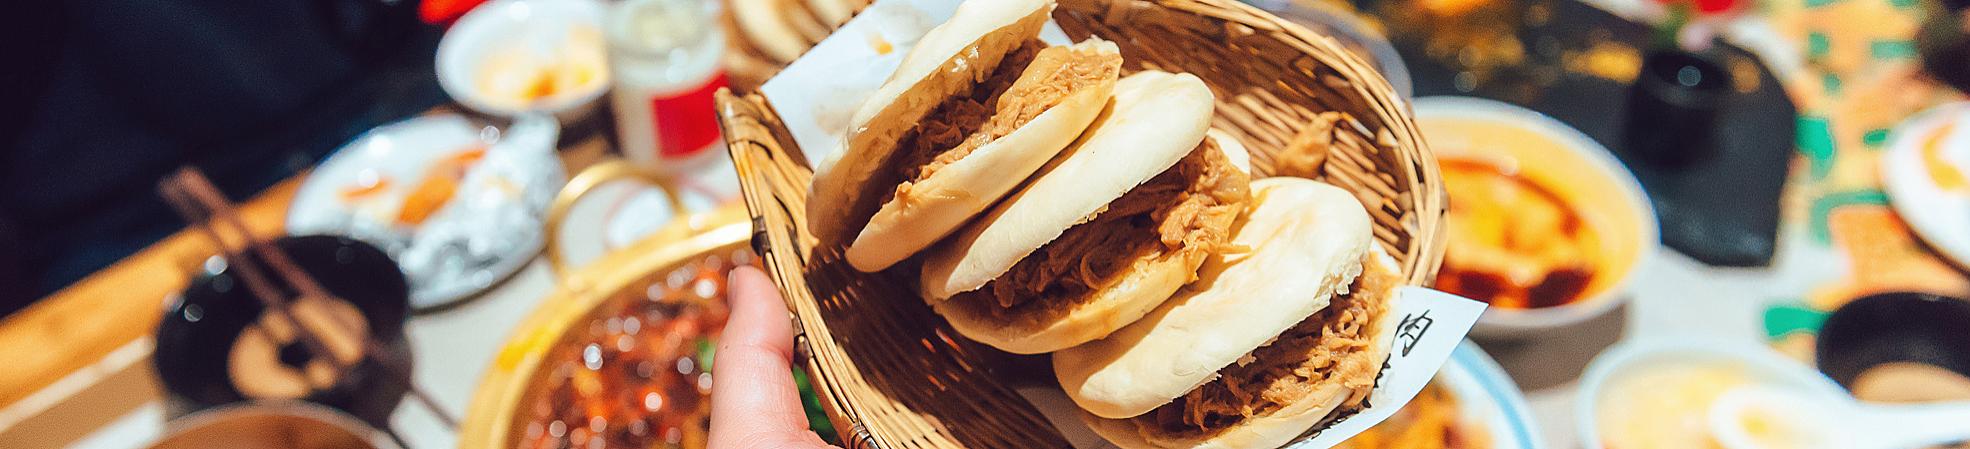 5 Popular China Food Tours That Will Rock Your Appetite